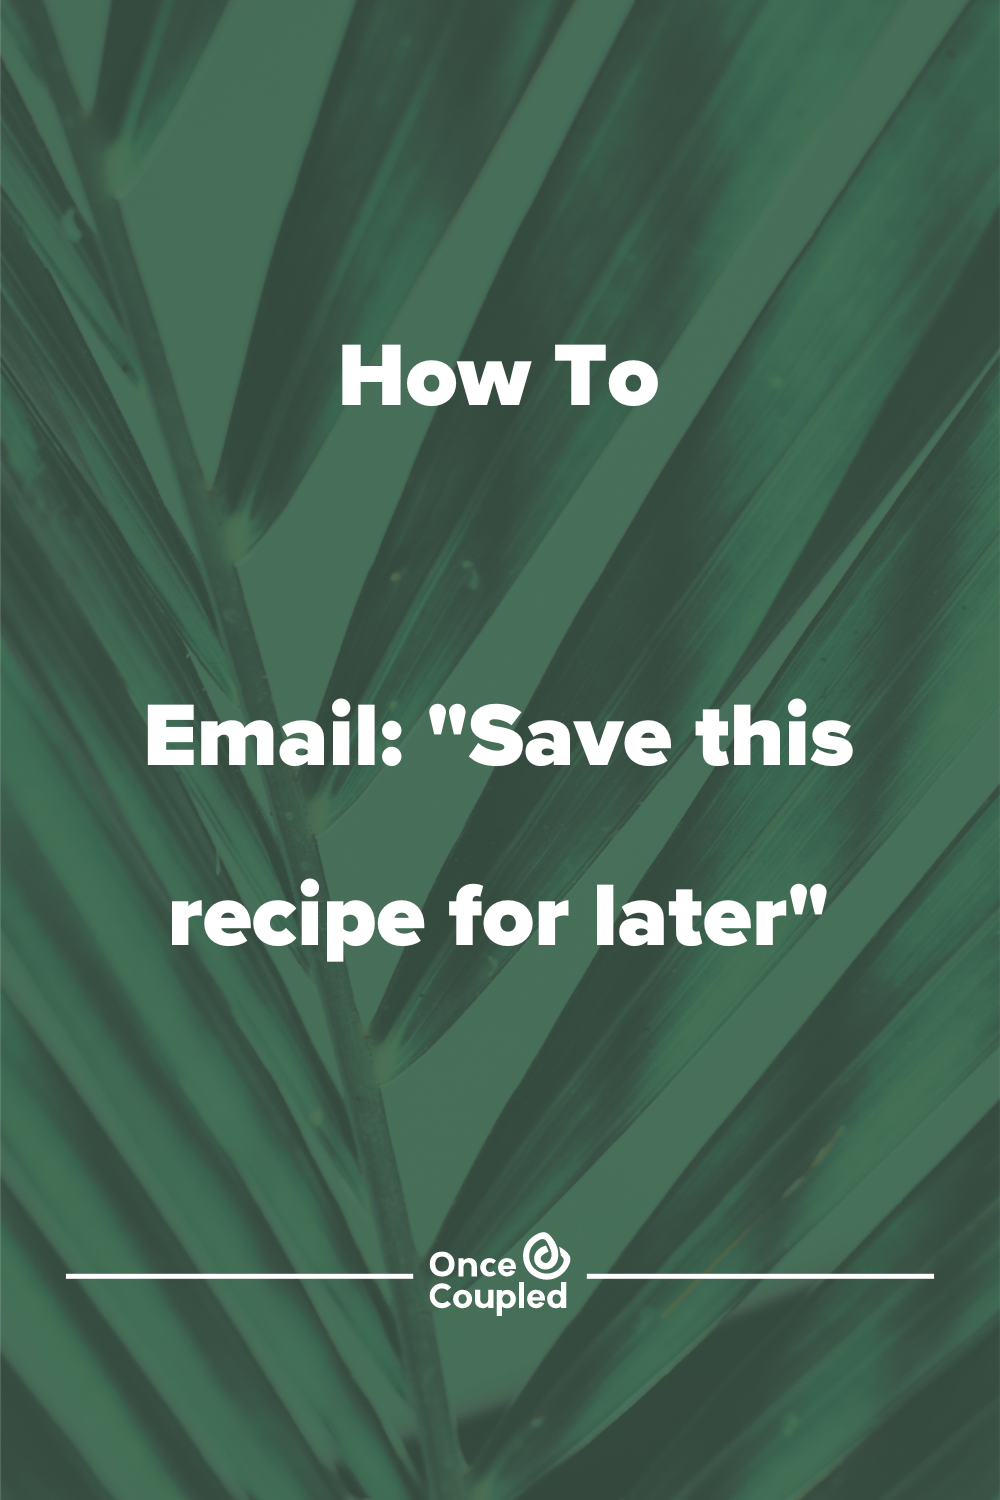 How to: email “save this recipe for later”